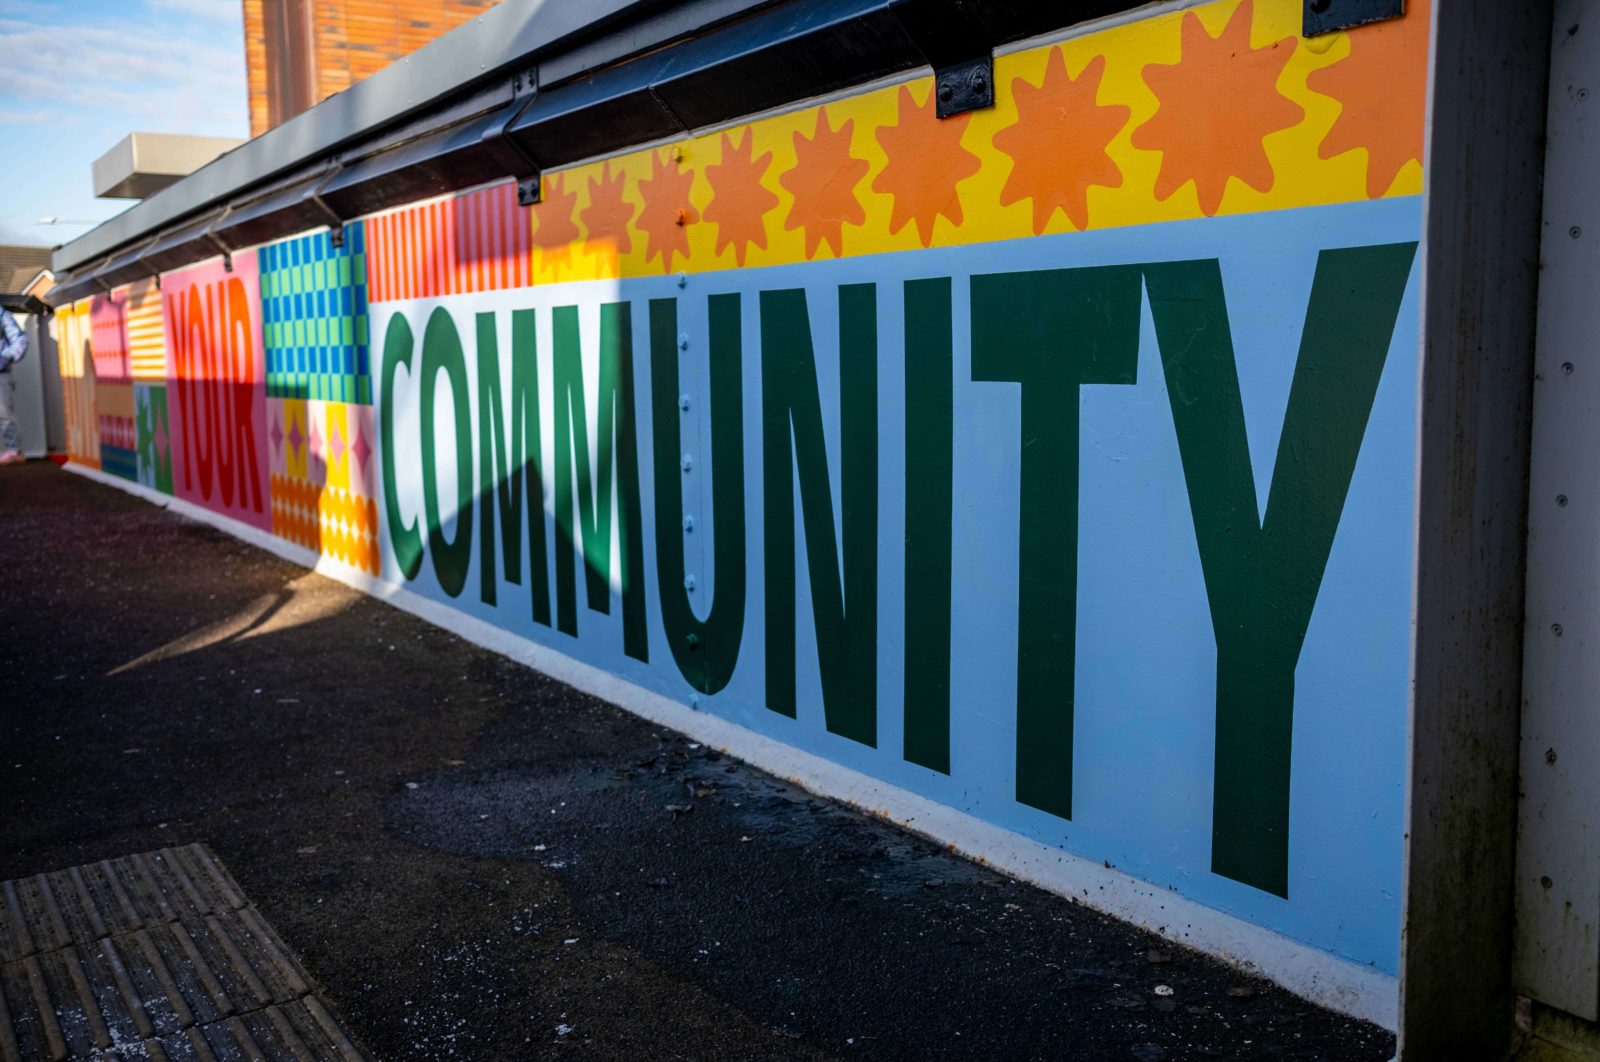 The mural is photographed from one side of the bridge, the word 'Community' is in focus.